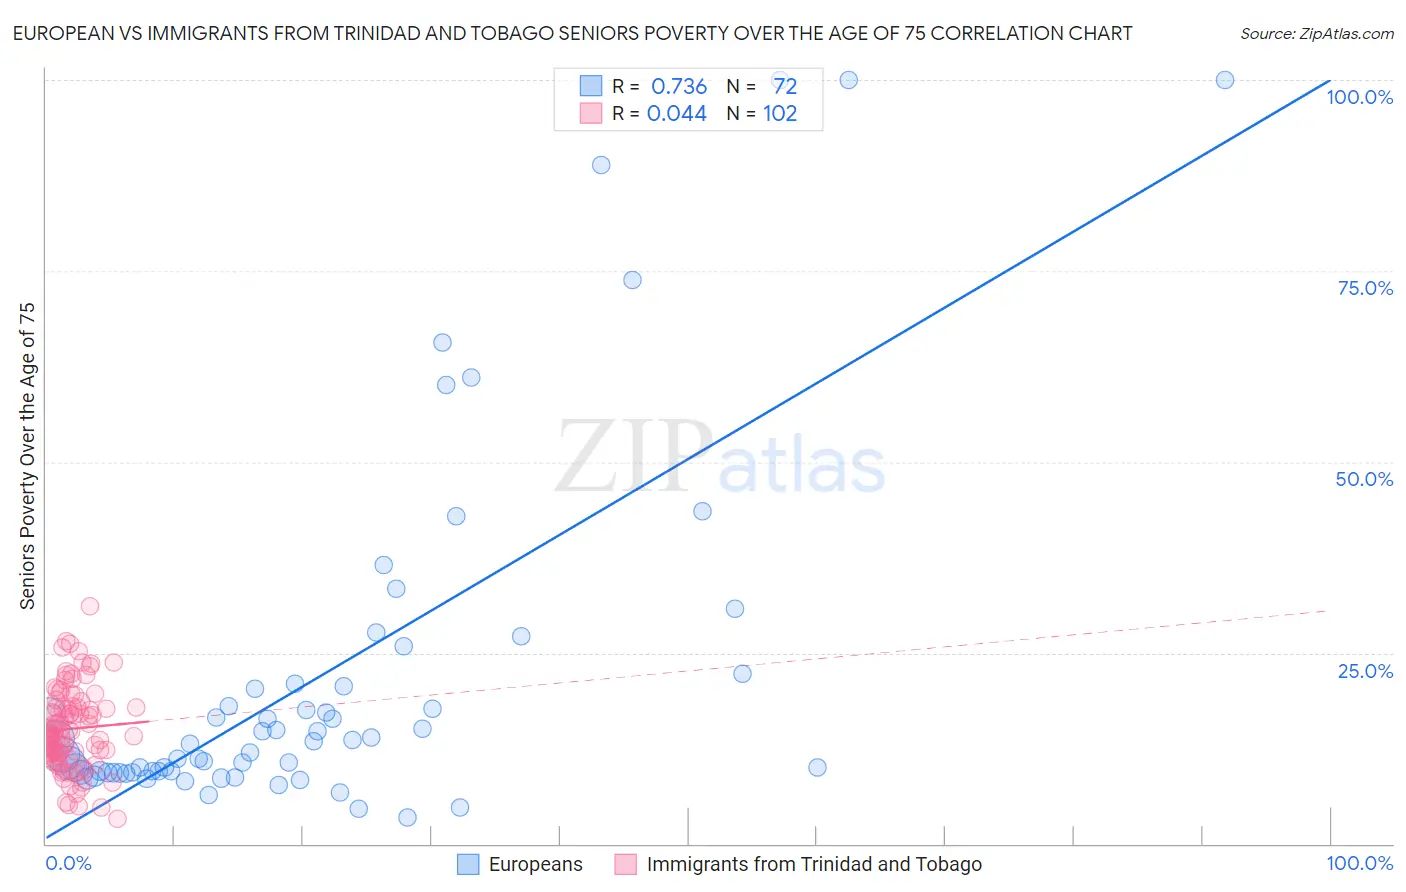 European vs Immigrants from Trinidad and Tobago Seniors Poverty Over the Age of 75